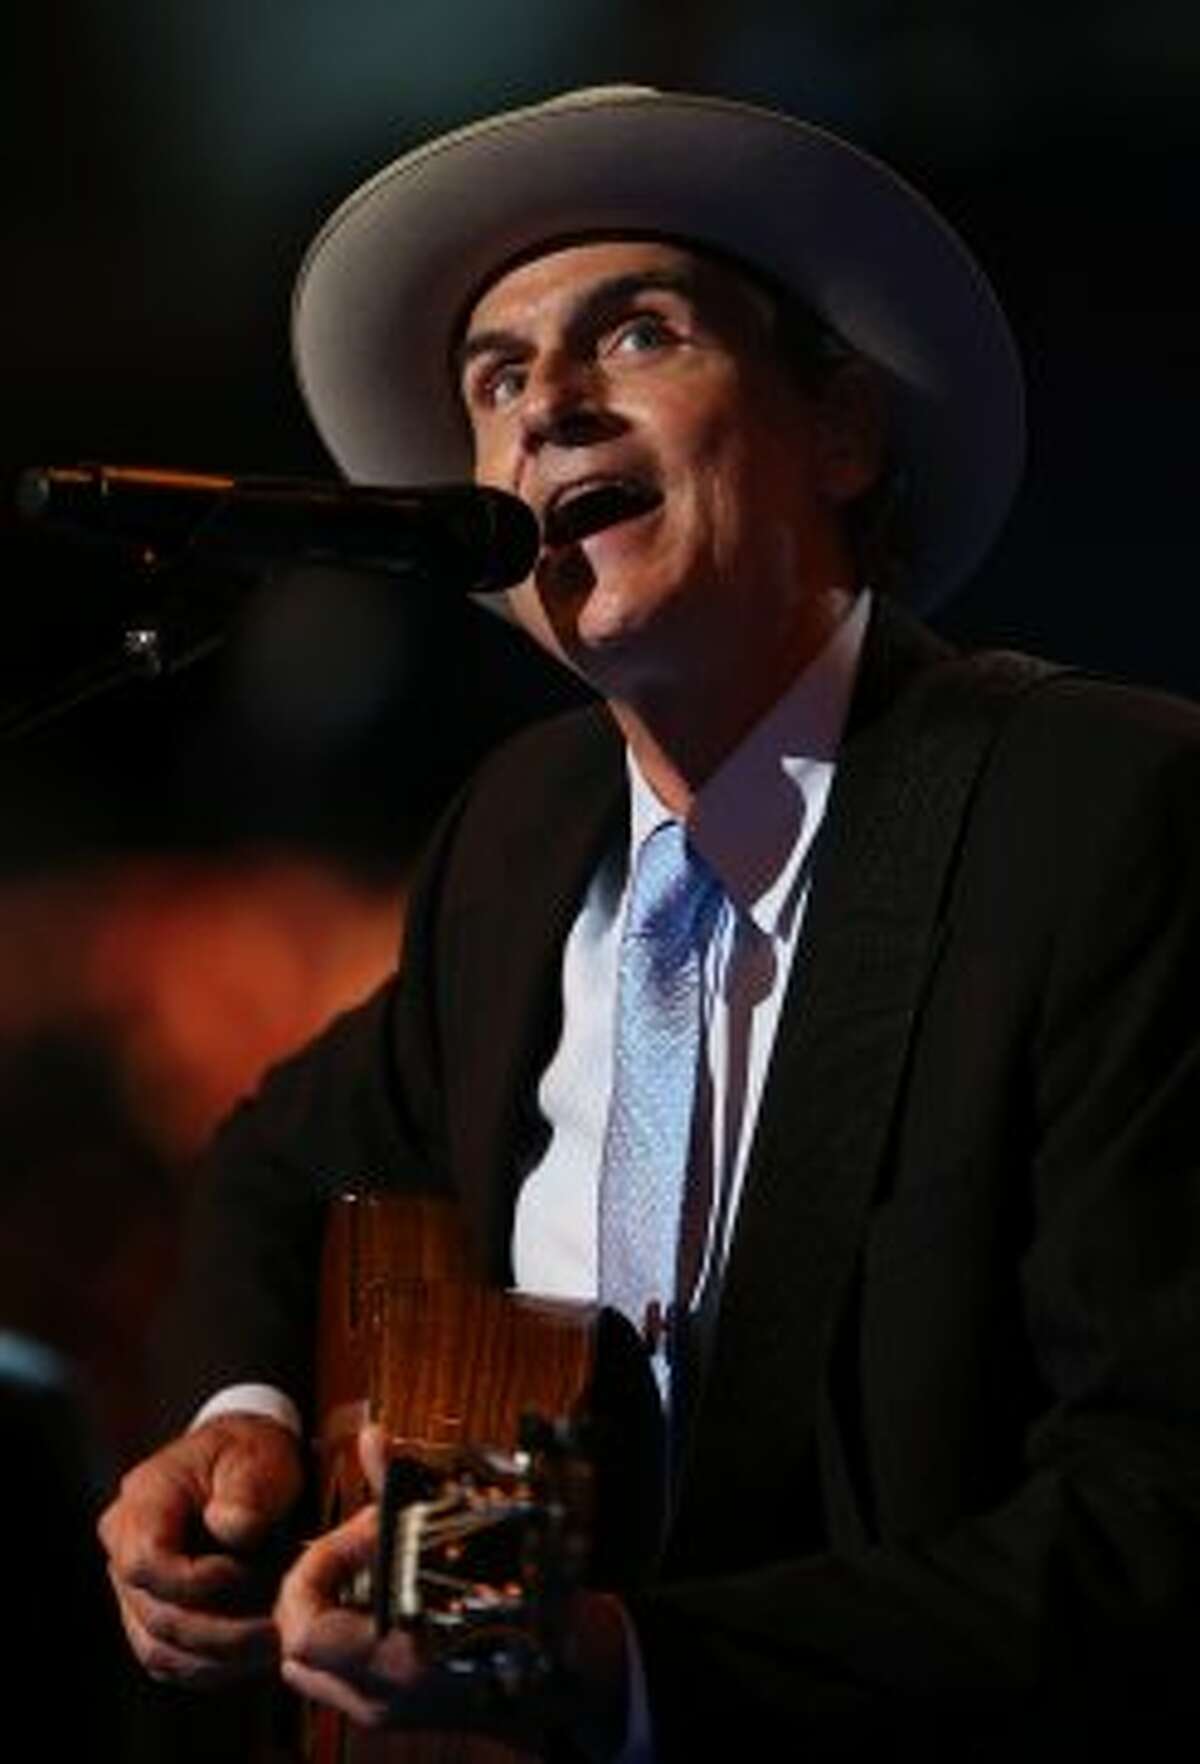 JAMES TAYLOR music legend: "Just to be there for your family. I've tried to be as much as possible. If there is a struggle, that's it, trying to balance family life and life on the road."